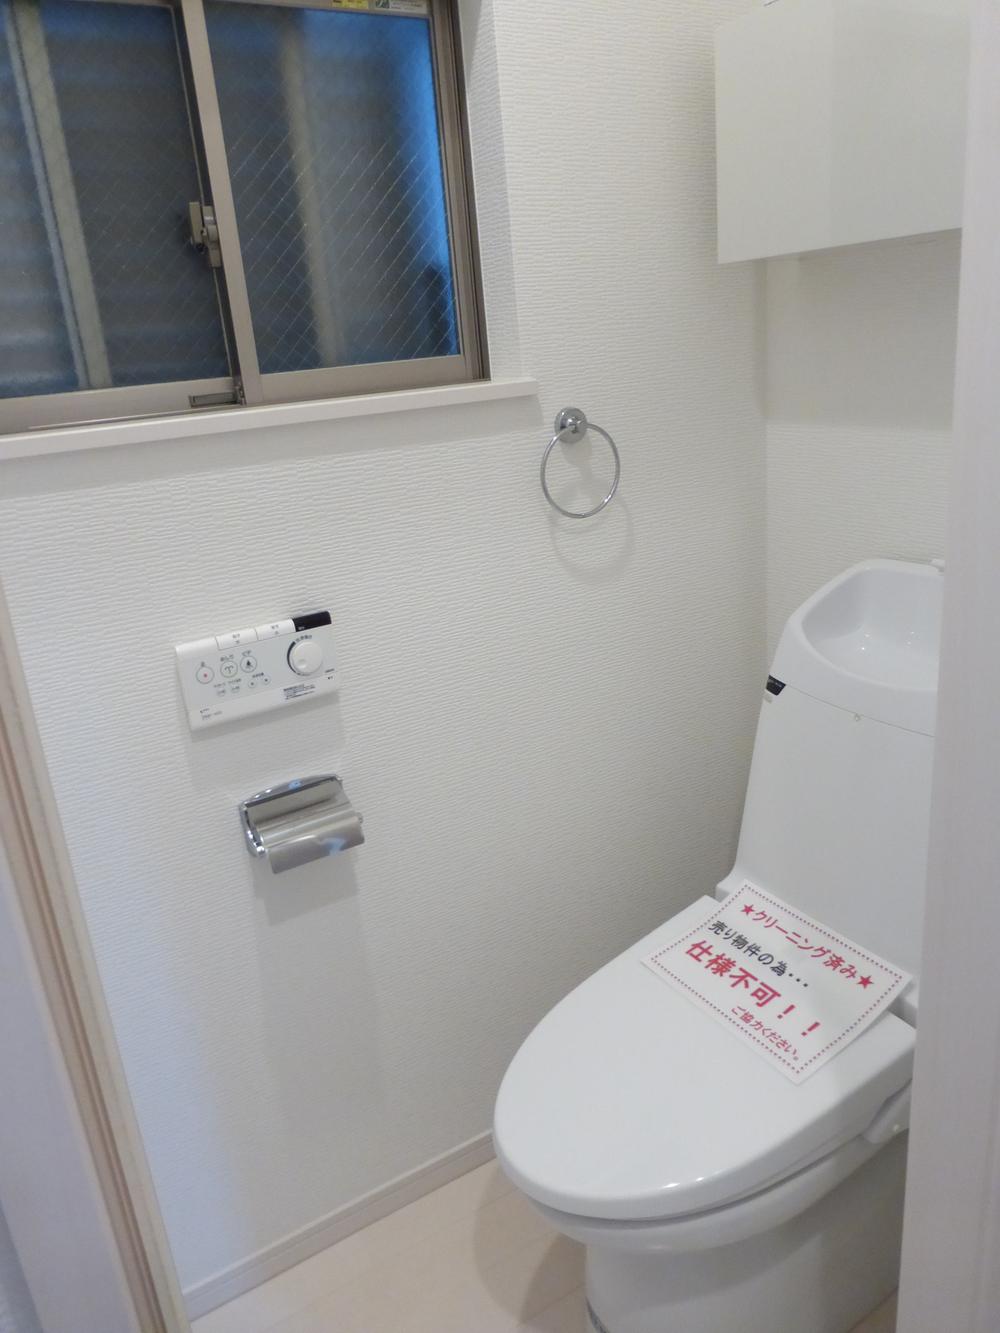 Toilet. Indoor (December 15, 2013) Shooting Toilet with cleanliness